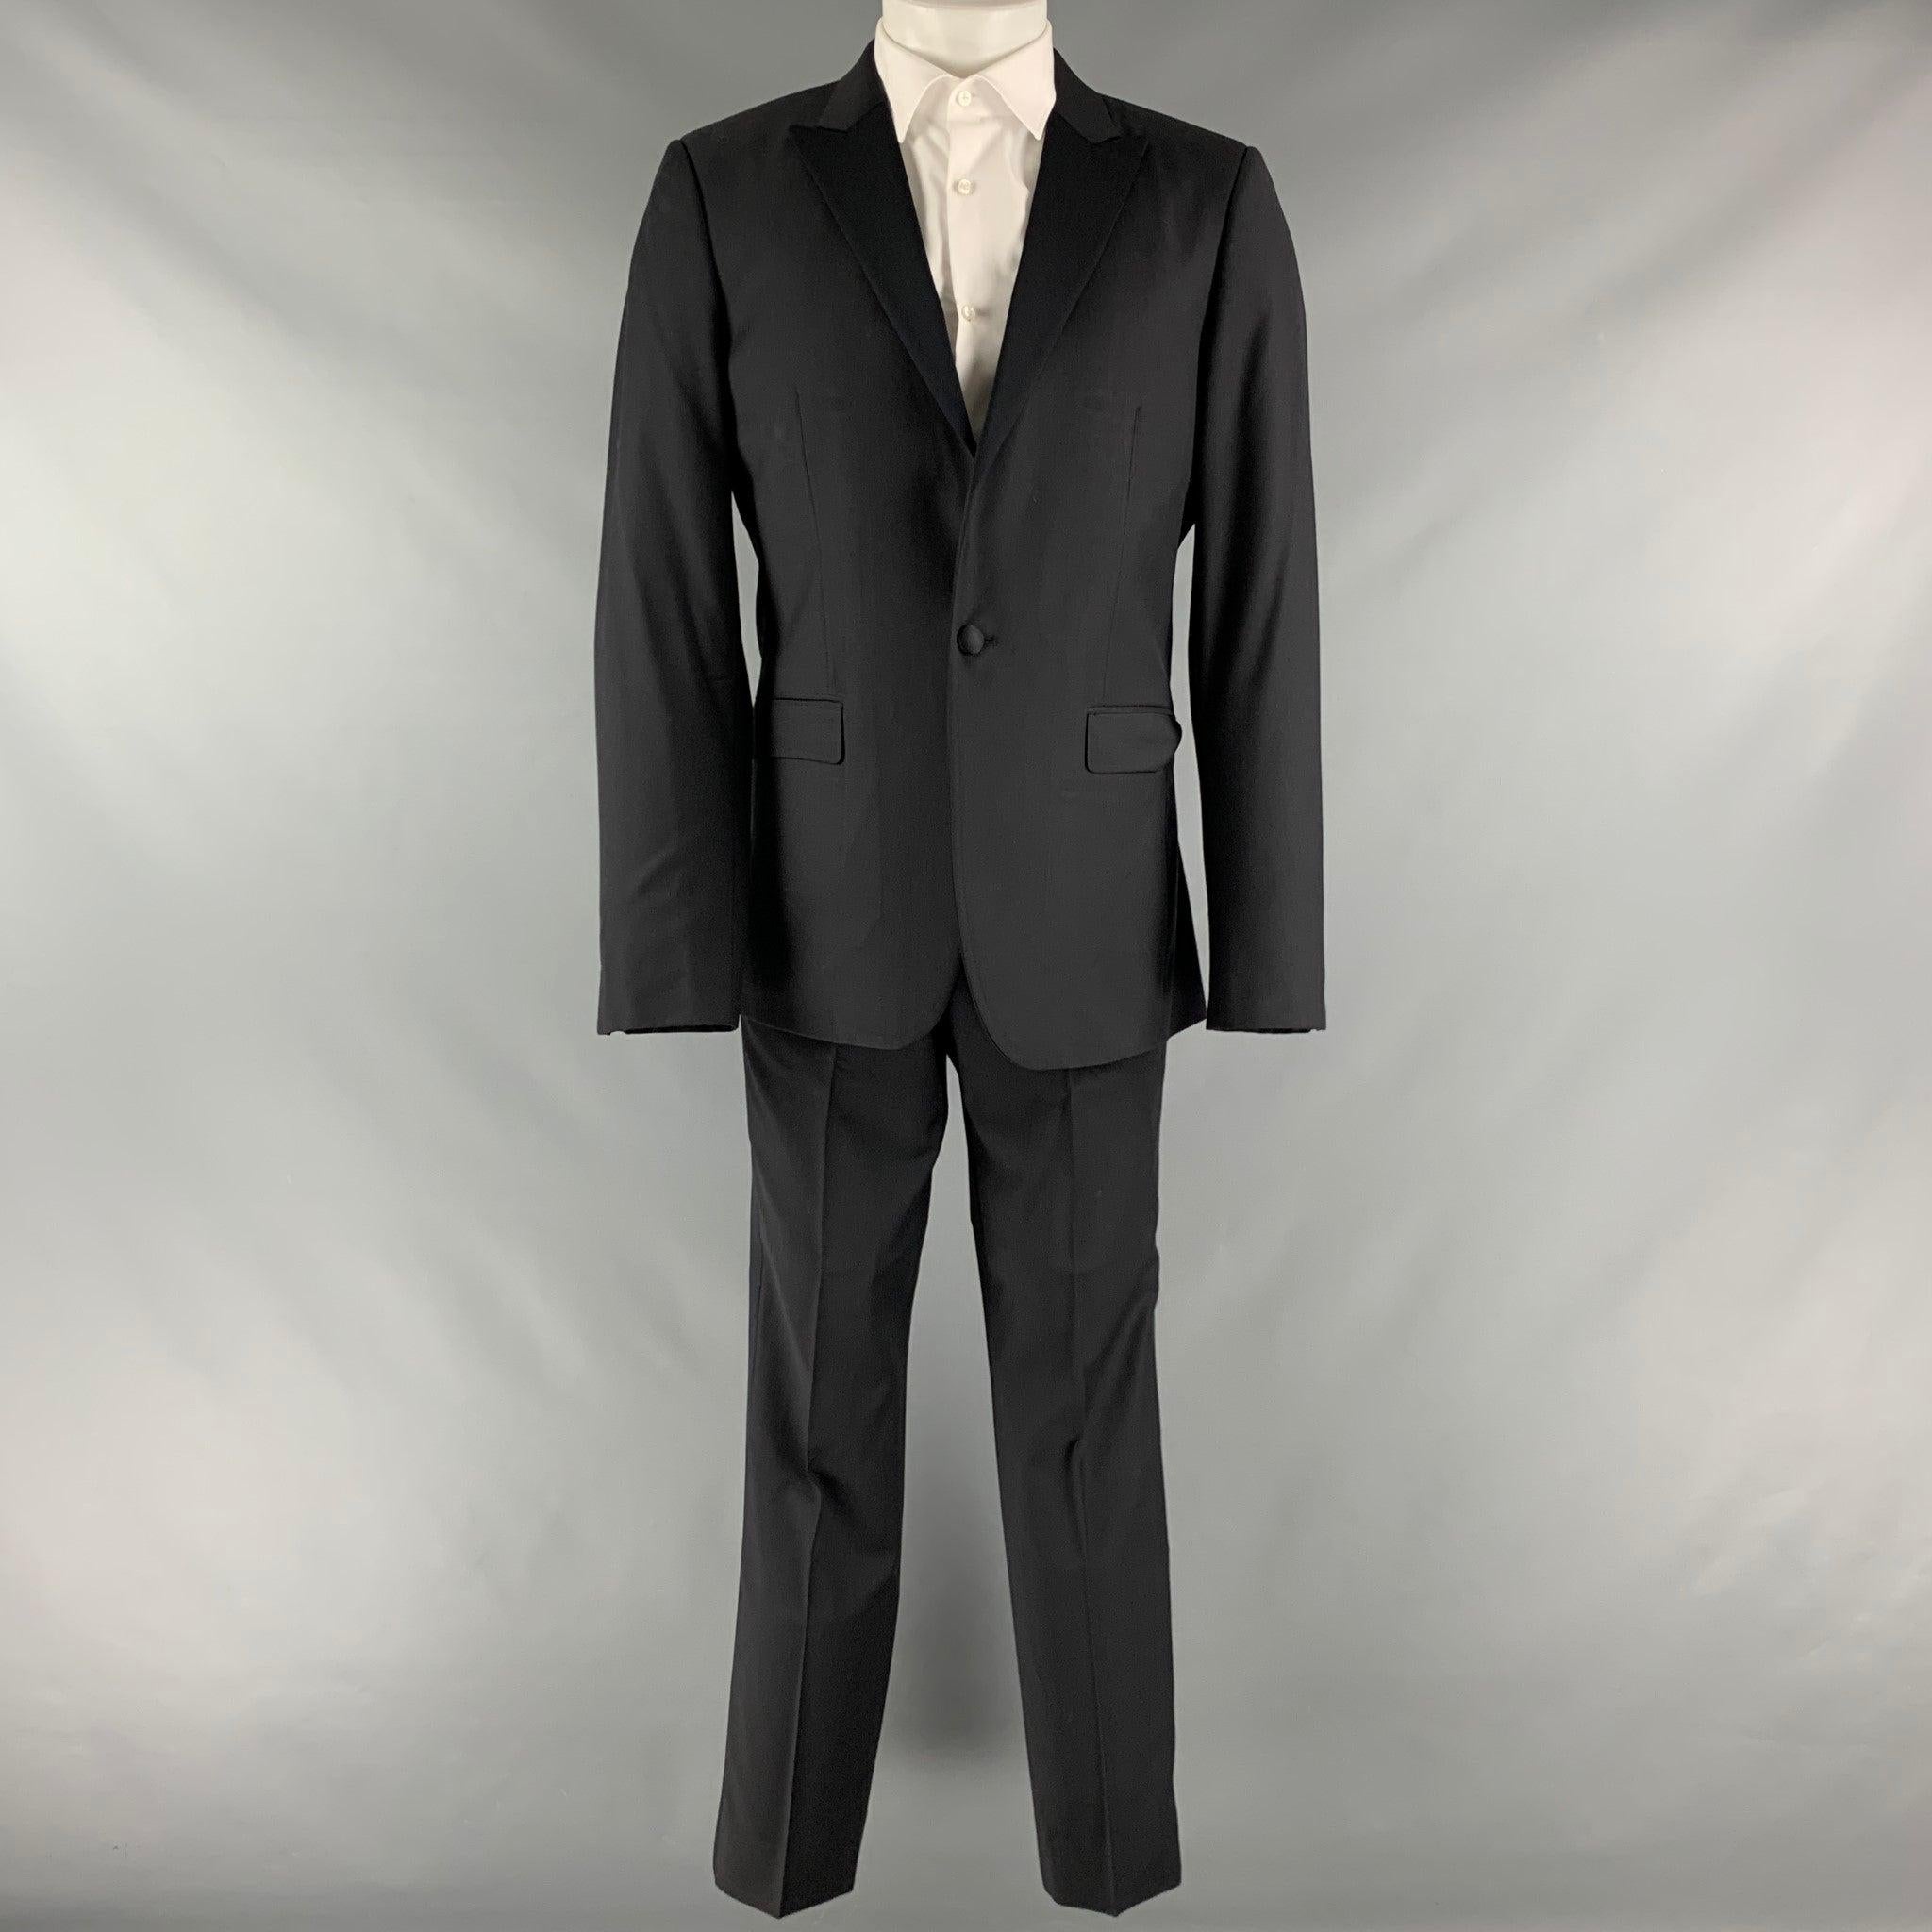 CALVIN KLEIN COLLECTION tuxedo comes in a black wool and includes a single breasted, single button sport coat with a peak lapel and matching flat front trousers. Made in Italy.Very Good Pre-Owned Condition. Minor mark at back. 

Marked:   48